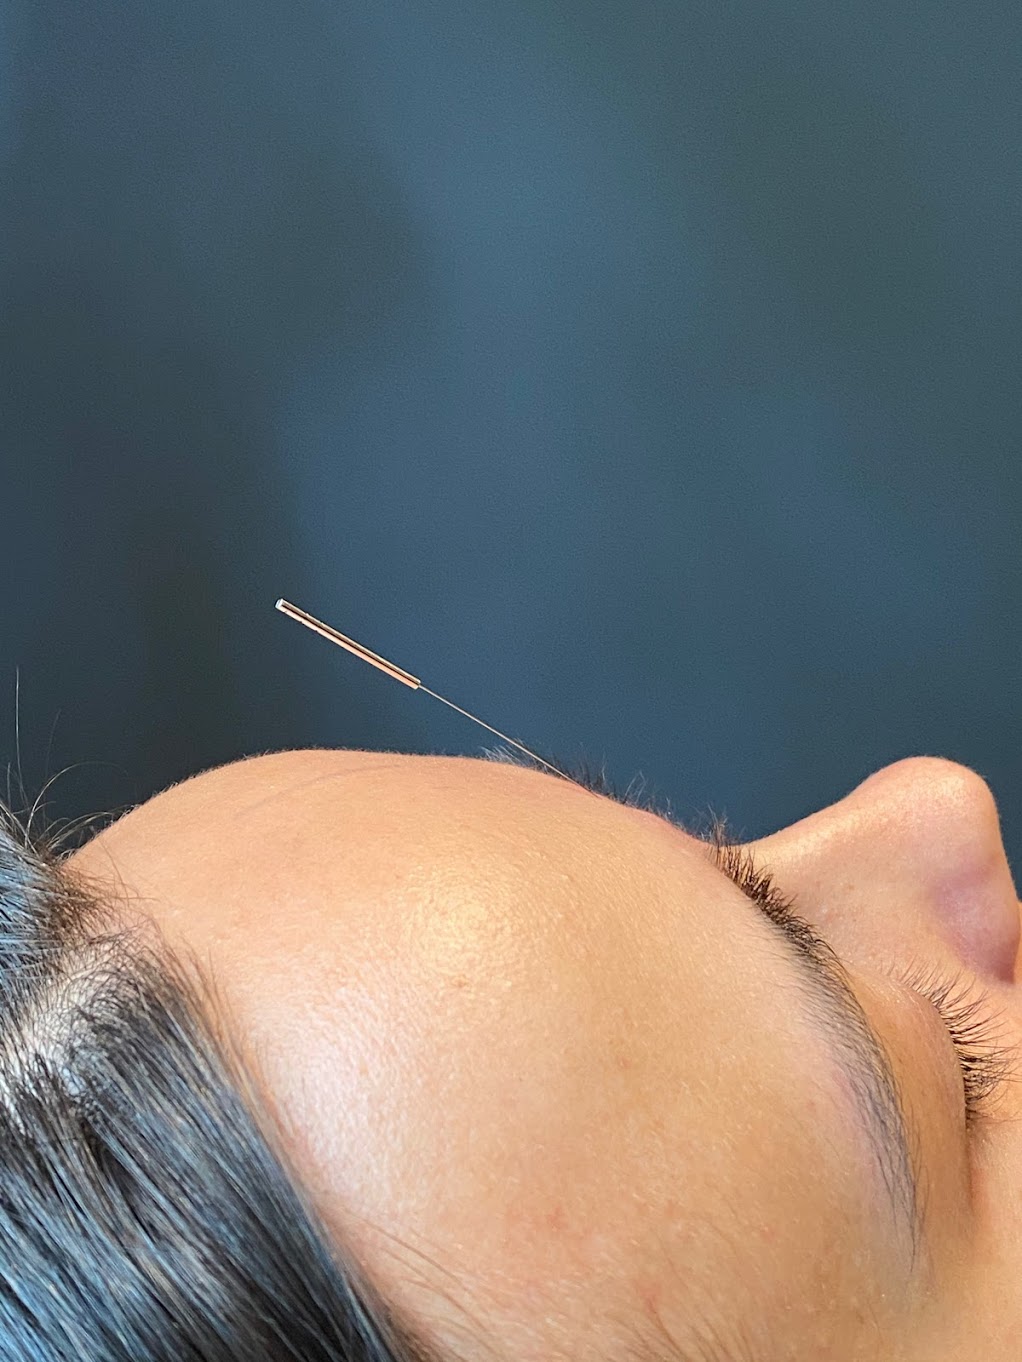 acupuncture at Dulwich physio